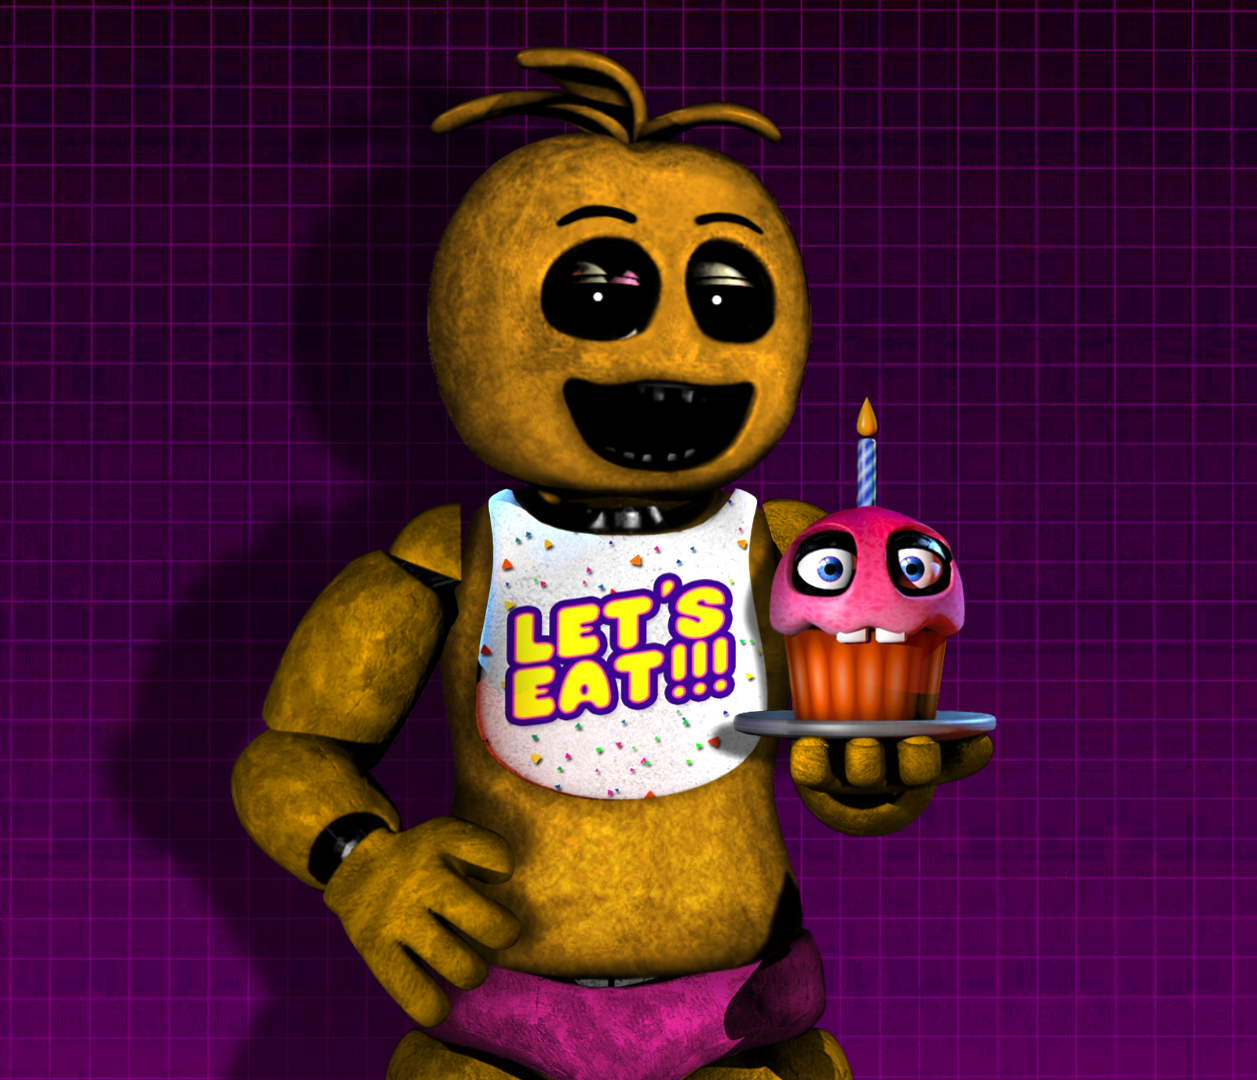 Fixed withered Chica (Help Wanted) by Fnaf-fan201 on DeviantArt